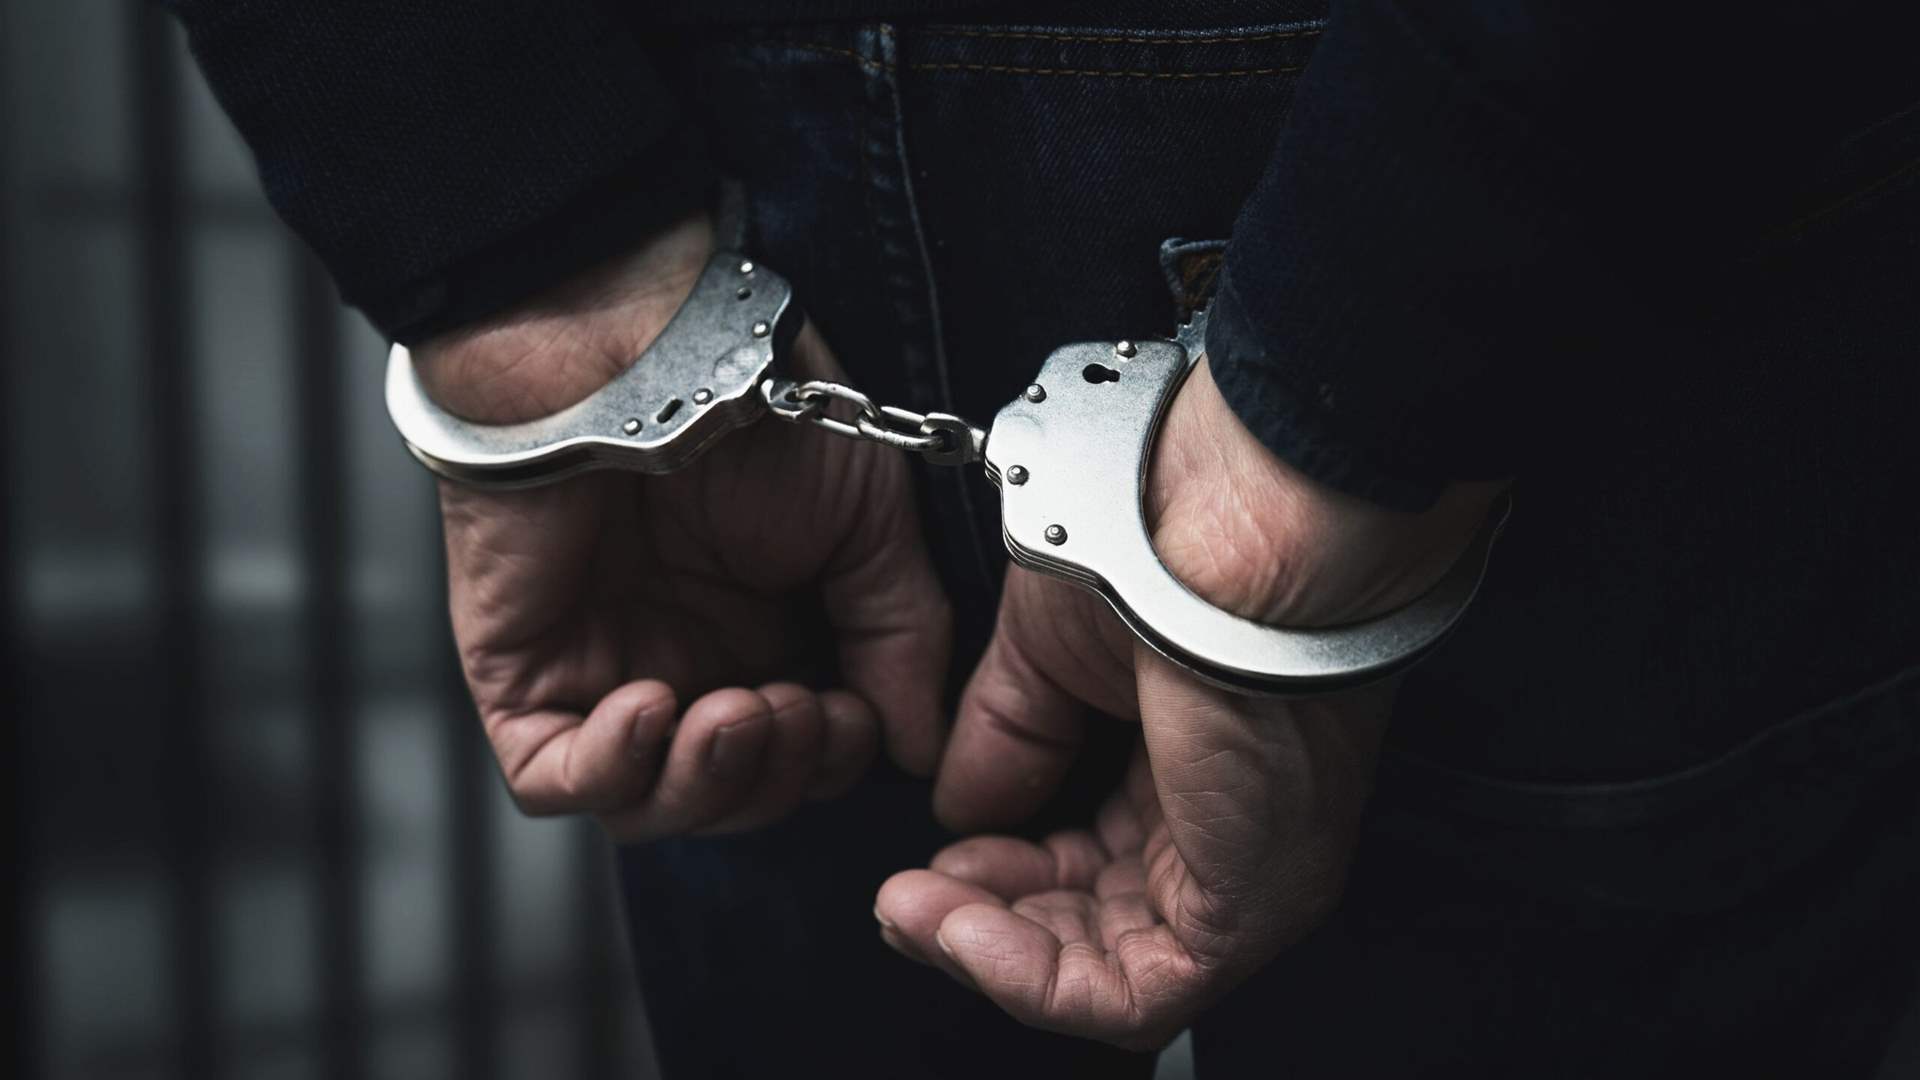 ISF arrests six individuals, including notorious minors on TikTok, after reports of sexual assaults